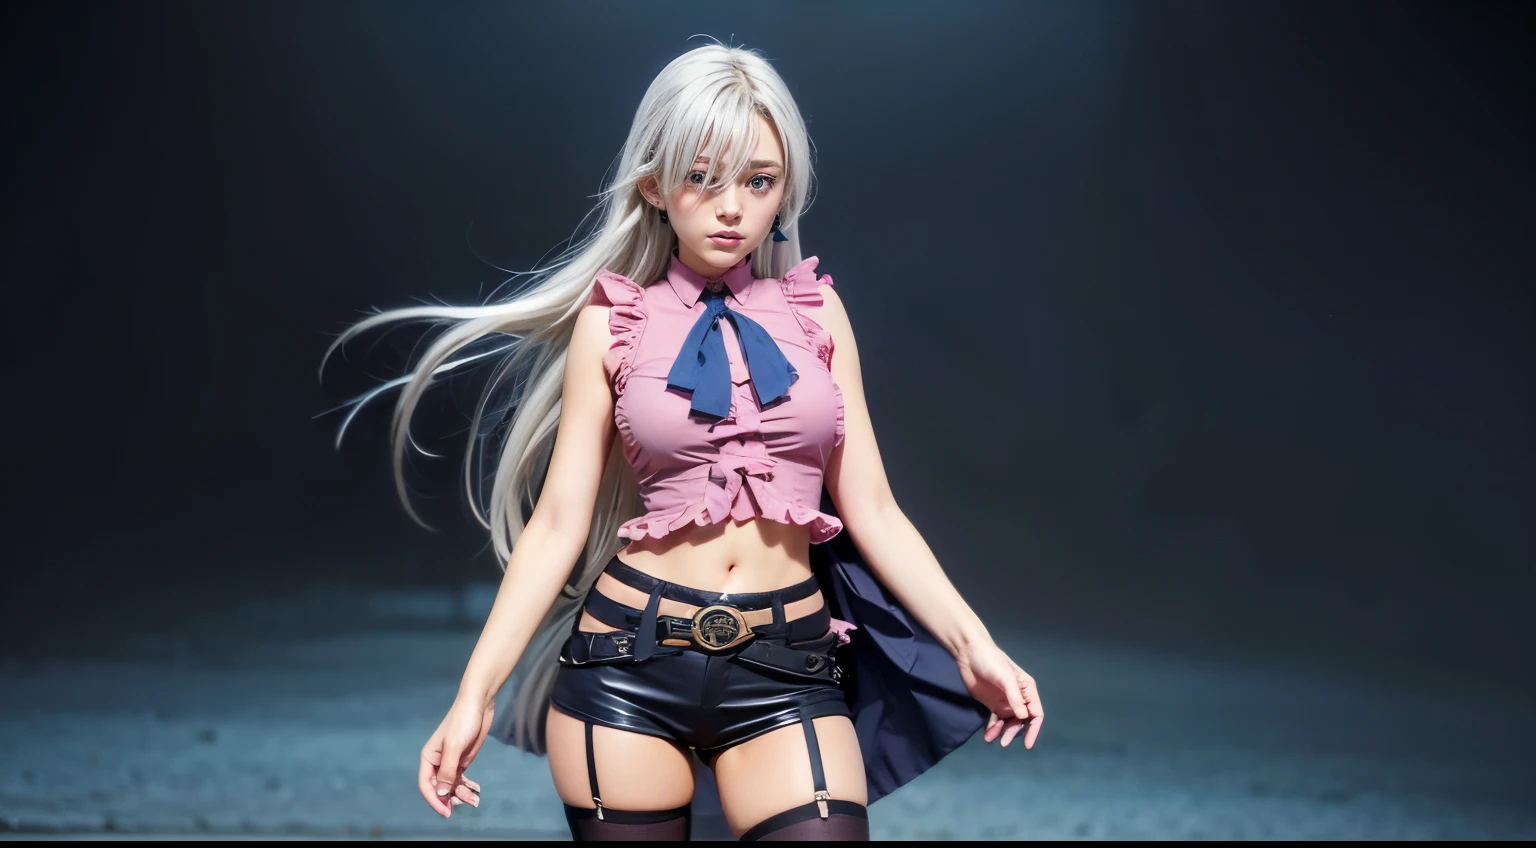 Silver hair, blue eyes, light skin, pink ruffled sleeveless blouse with blue bow, black shorts with belt and buckle, thigh-high black stocking on right leg, turquoise earrings, hand touching blue bow, (covered eye by hair:1.3), Elizabeth, upper body